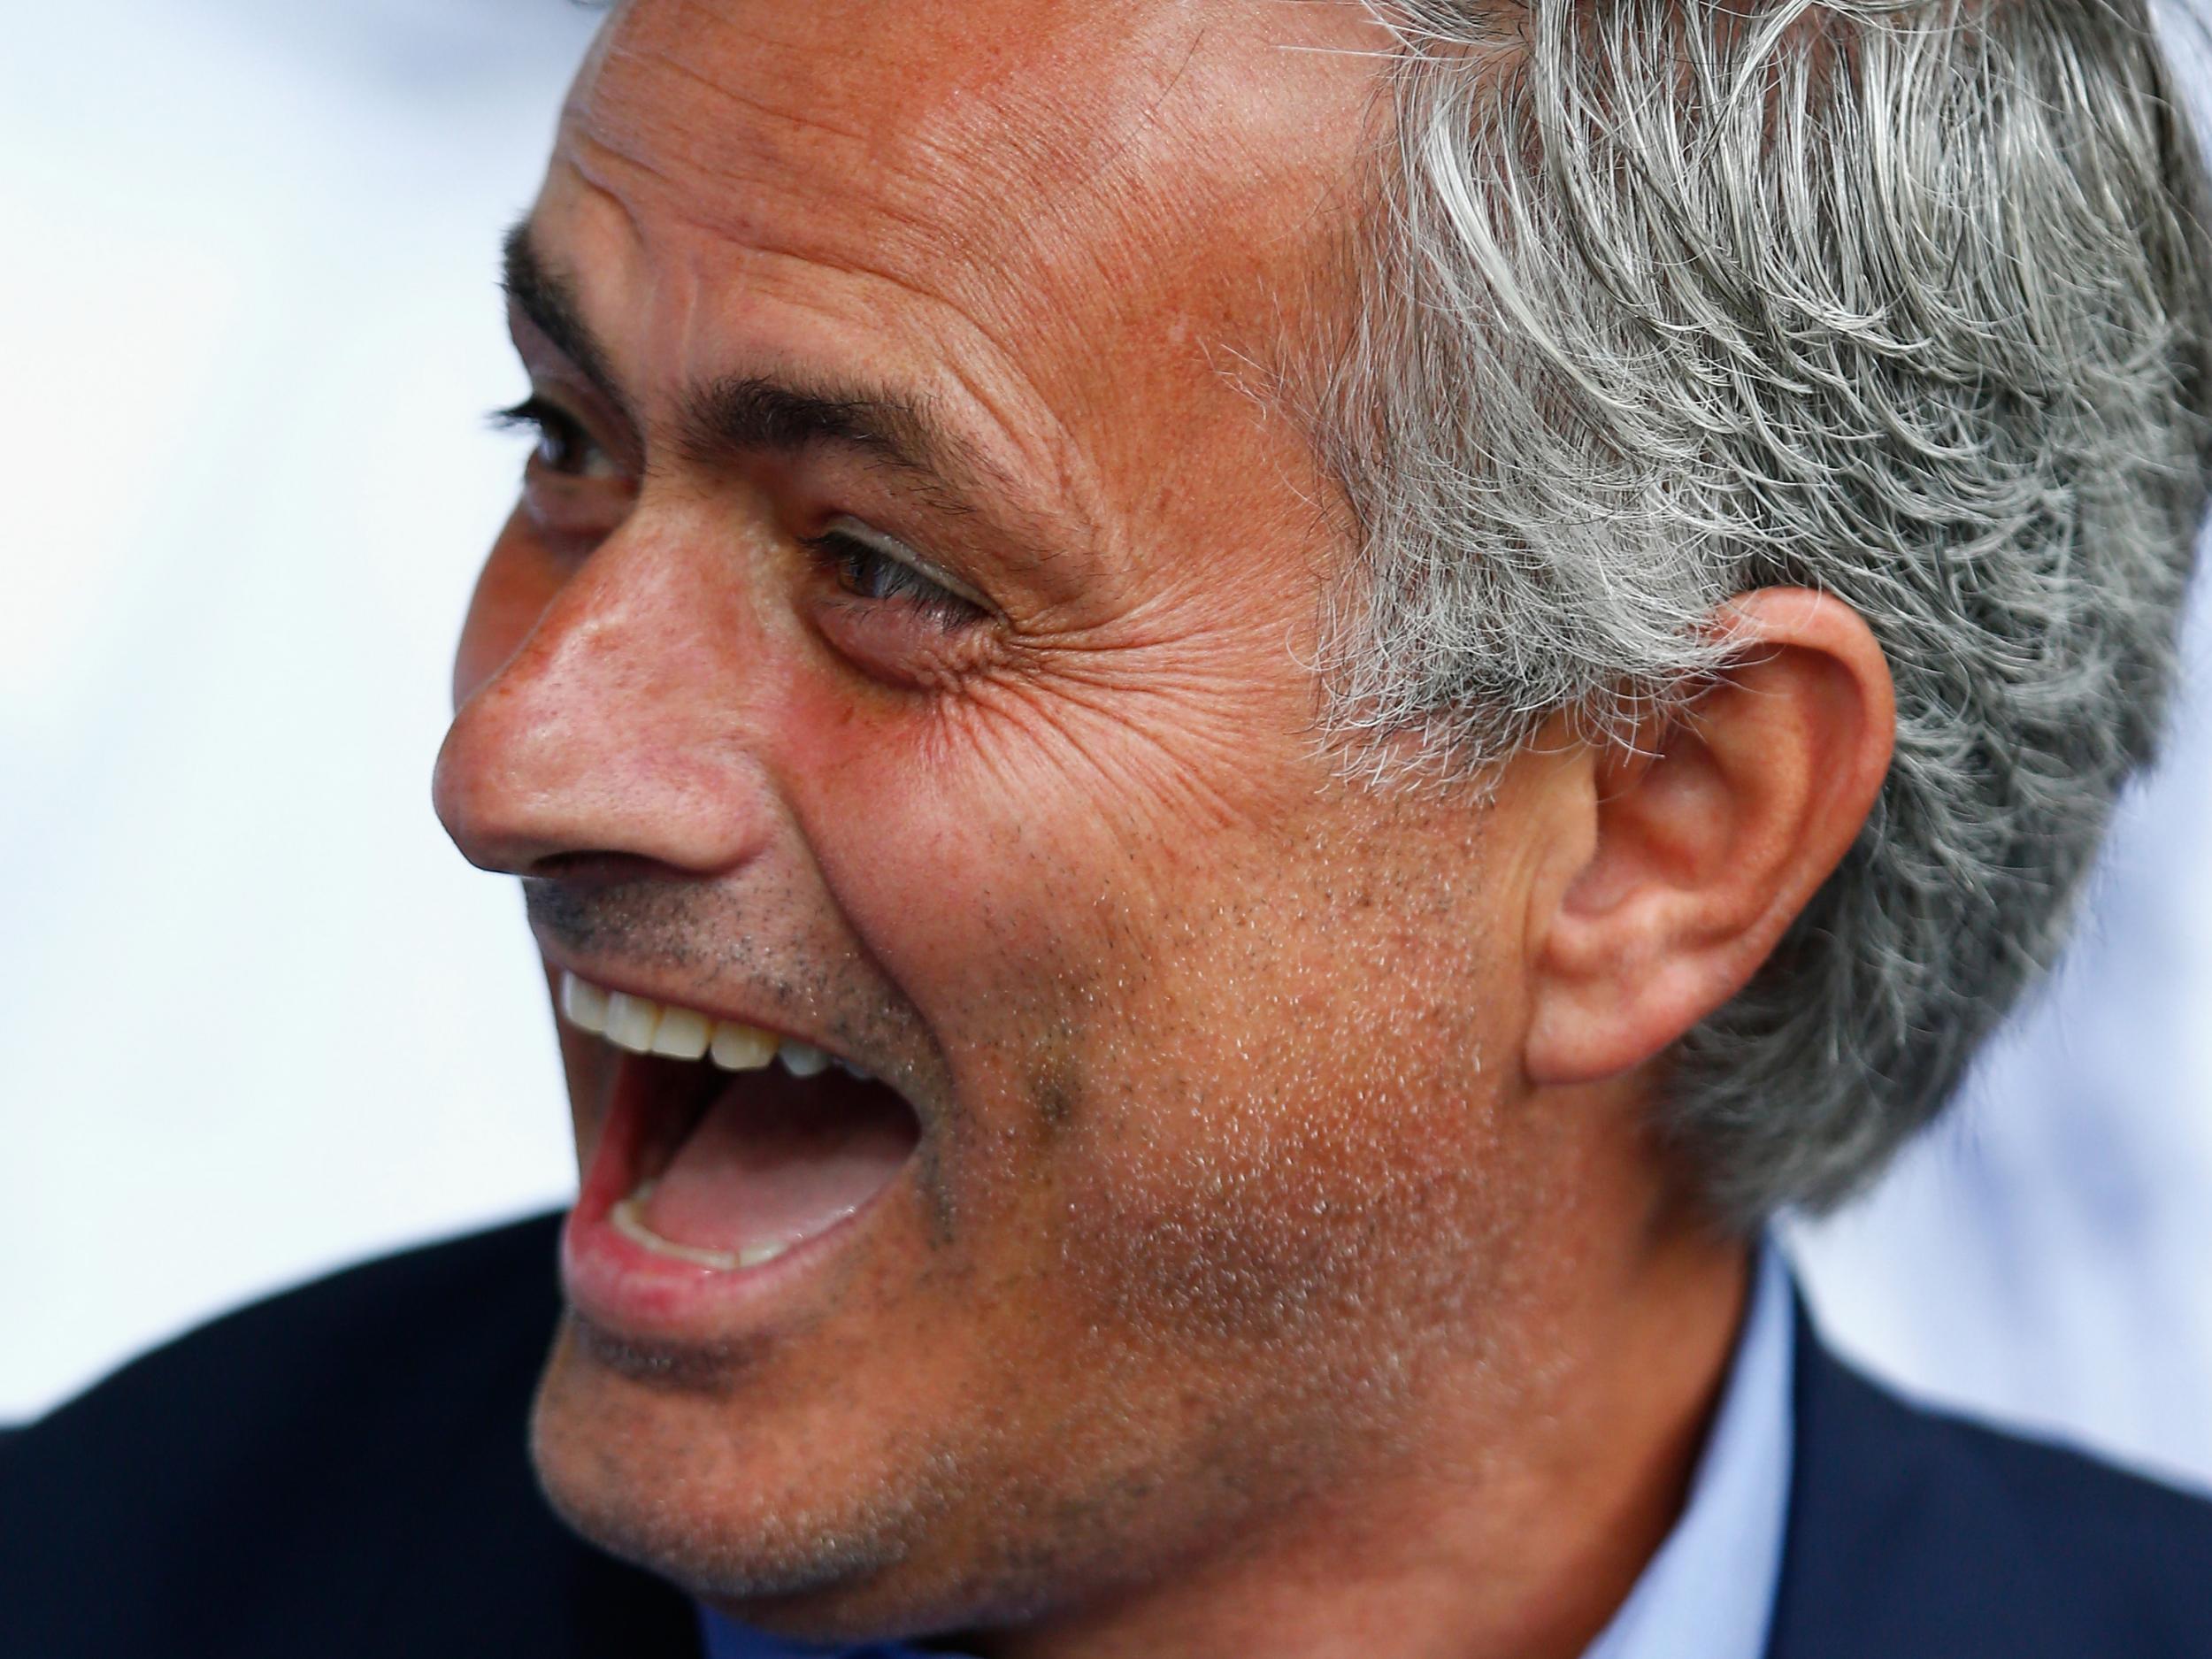 Jose Mourinho's side return to the competition this year after lifting the Europa League in May